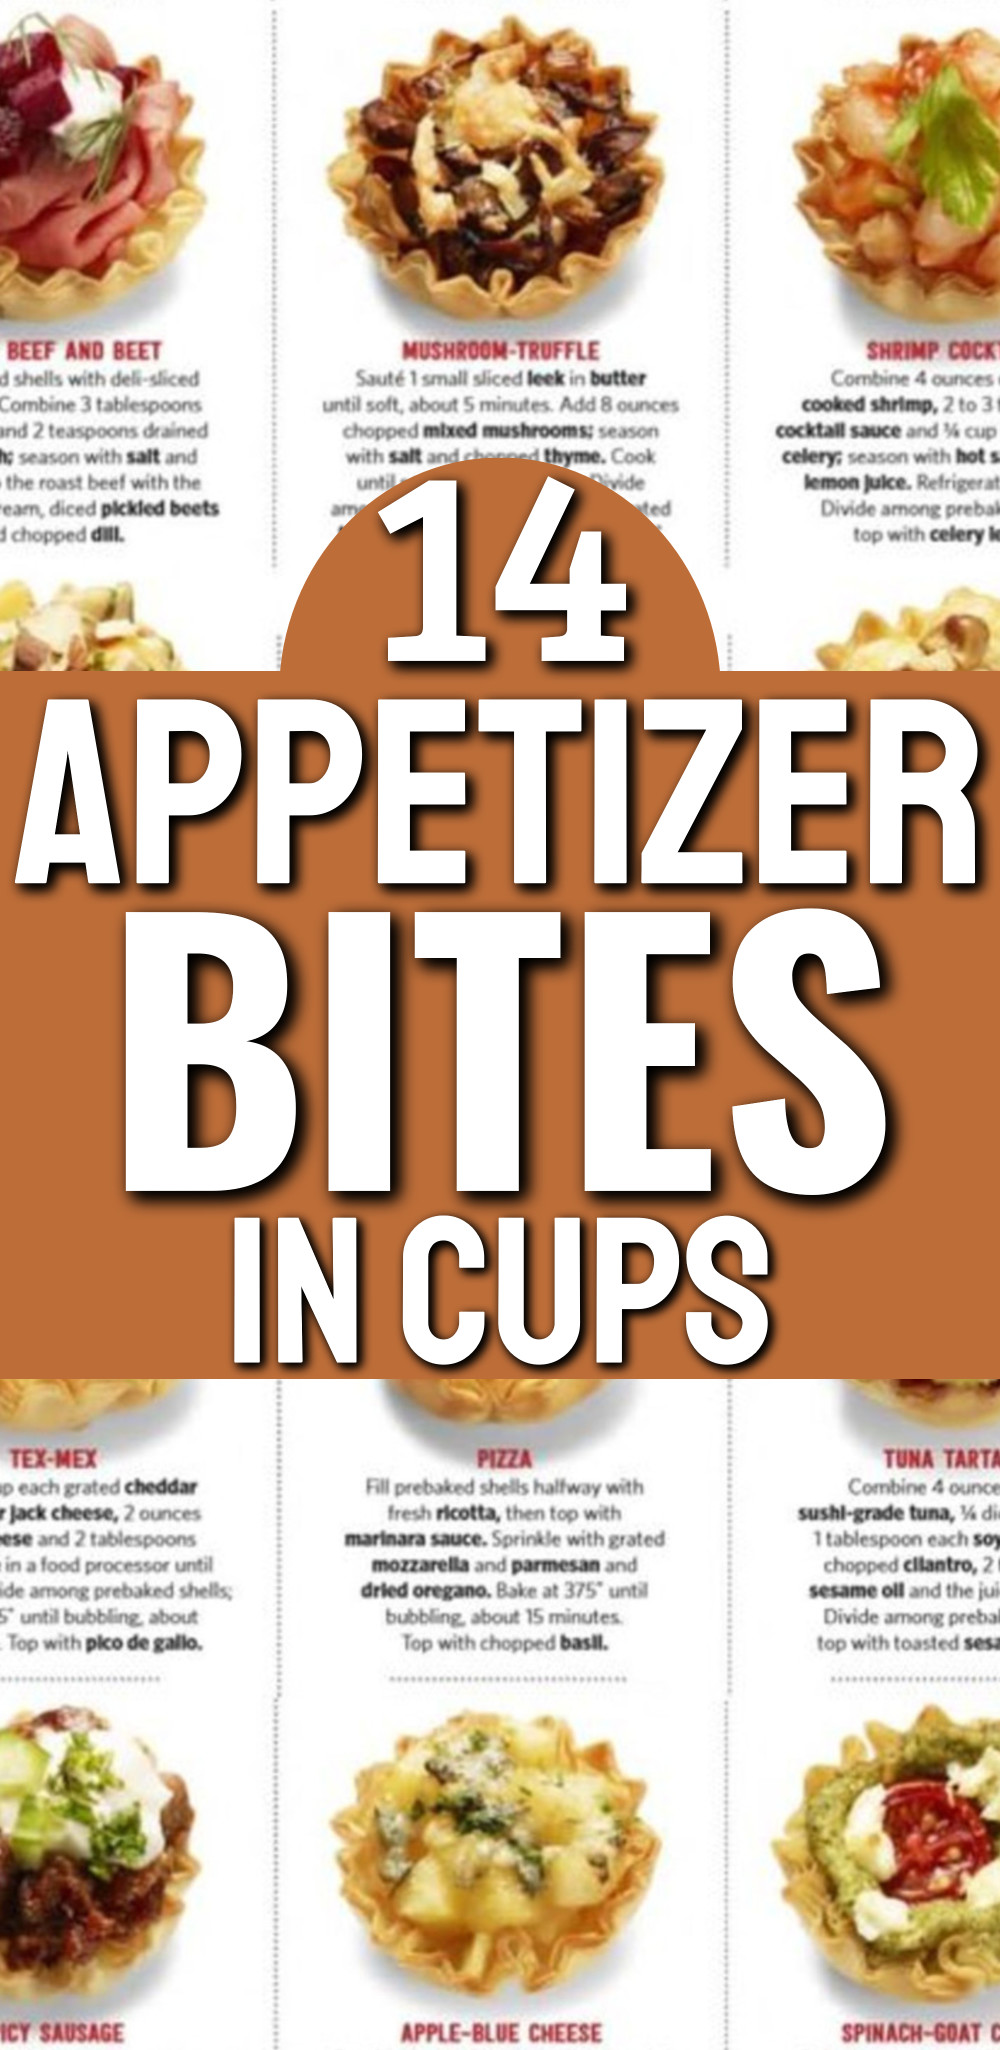 appetizer bites in cups